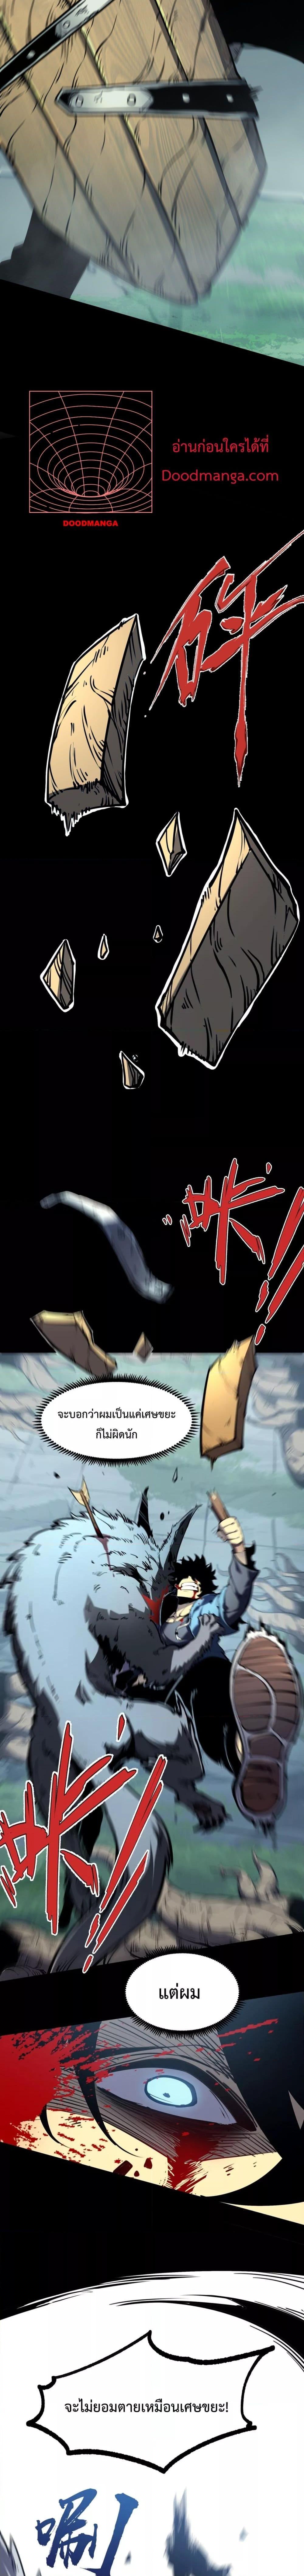 I Became The King by Scavenging โ€“ เนเธเนเธฅเน เน€เธฅเน€เธงเนเธฅเธฅเธฃเธดเนเธ เธ•เธญเธเธ—เธตเน 1 (3)